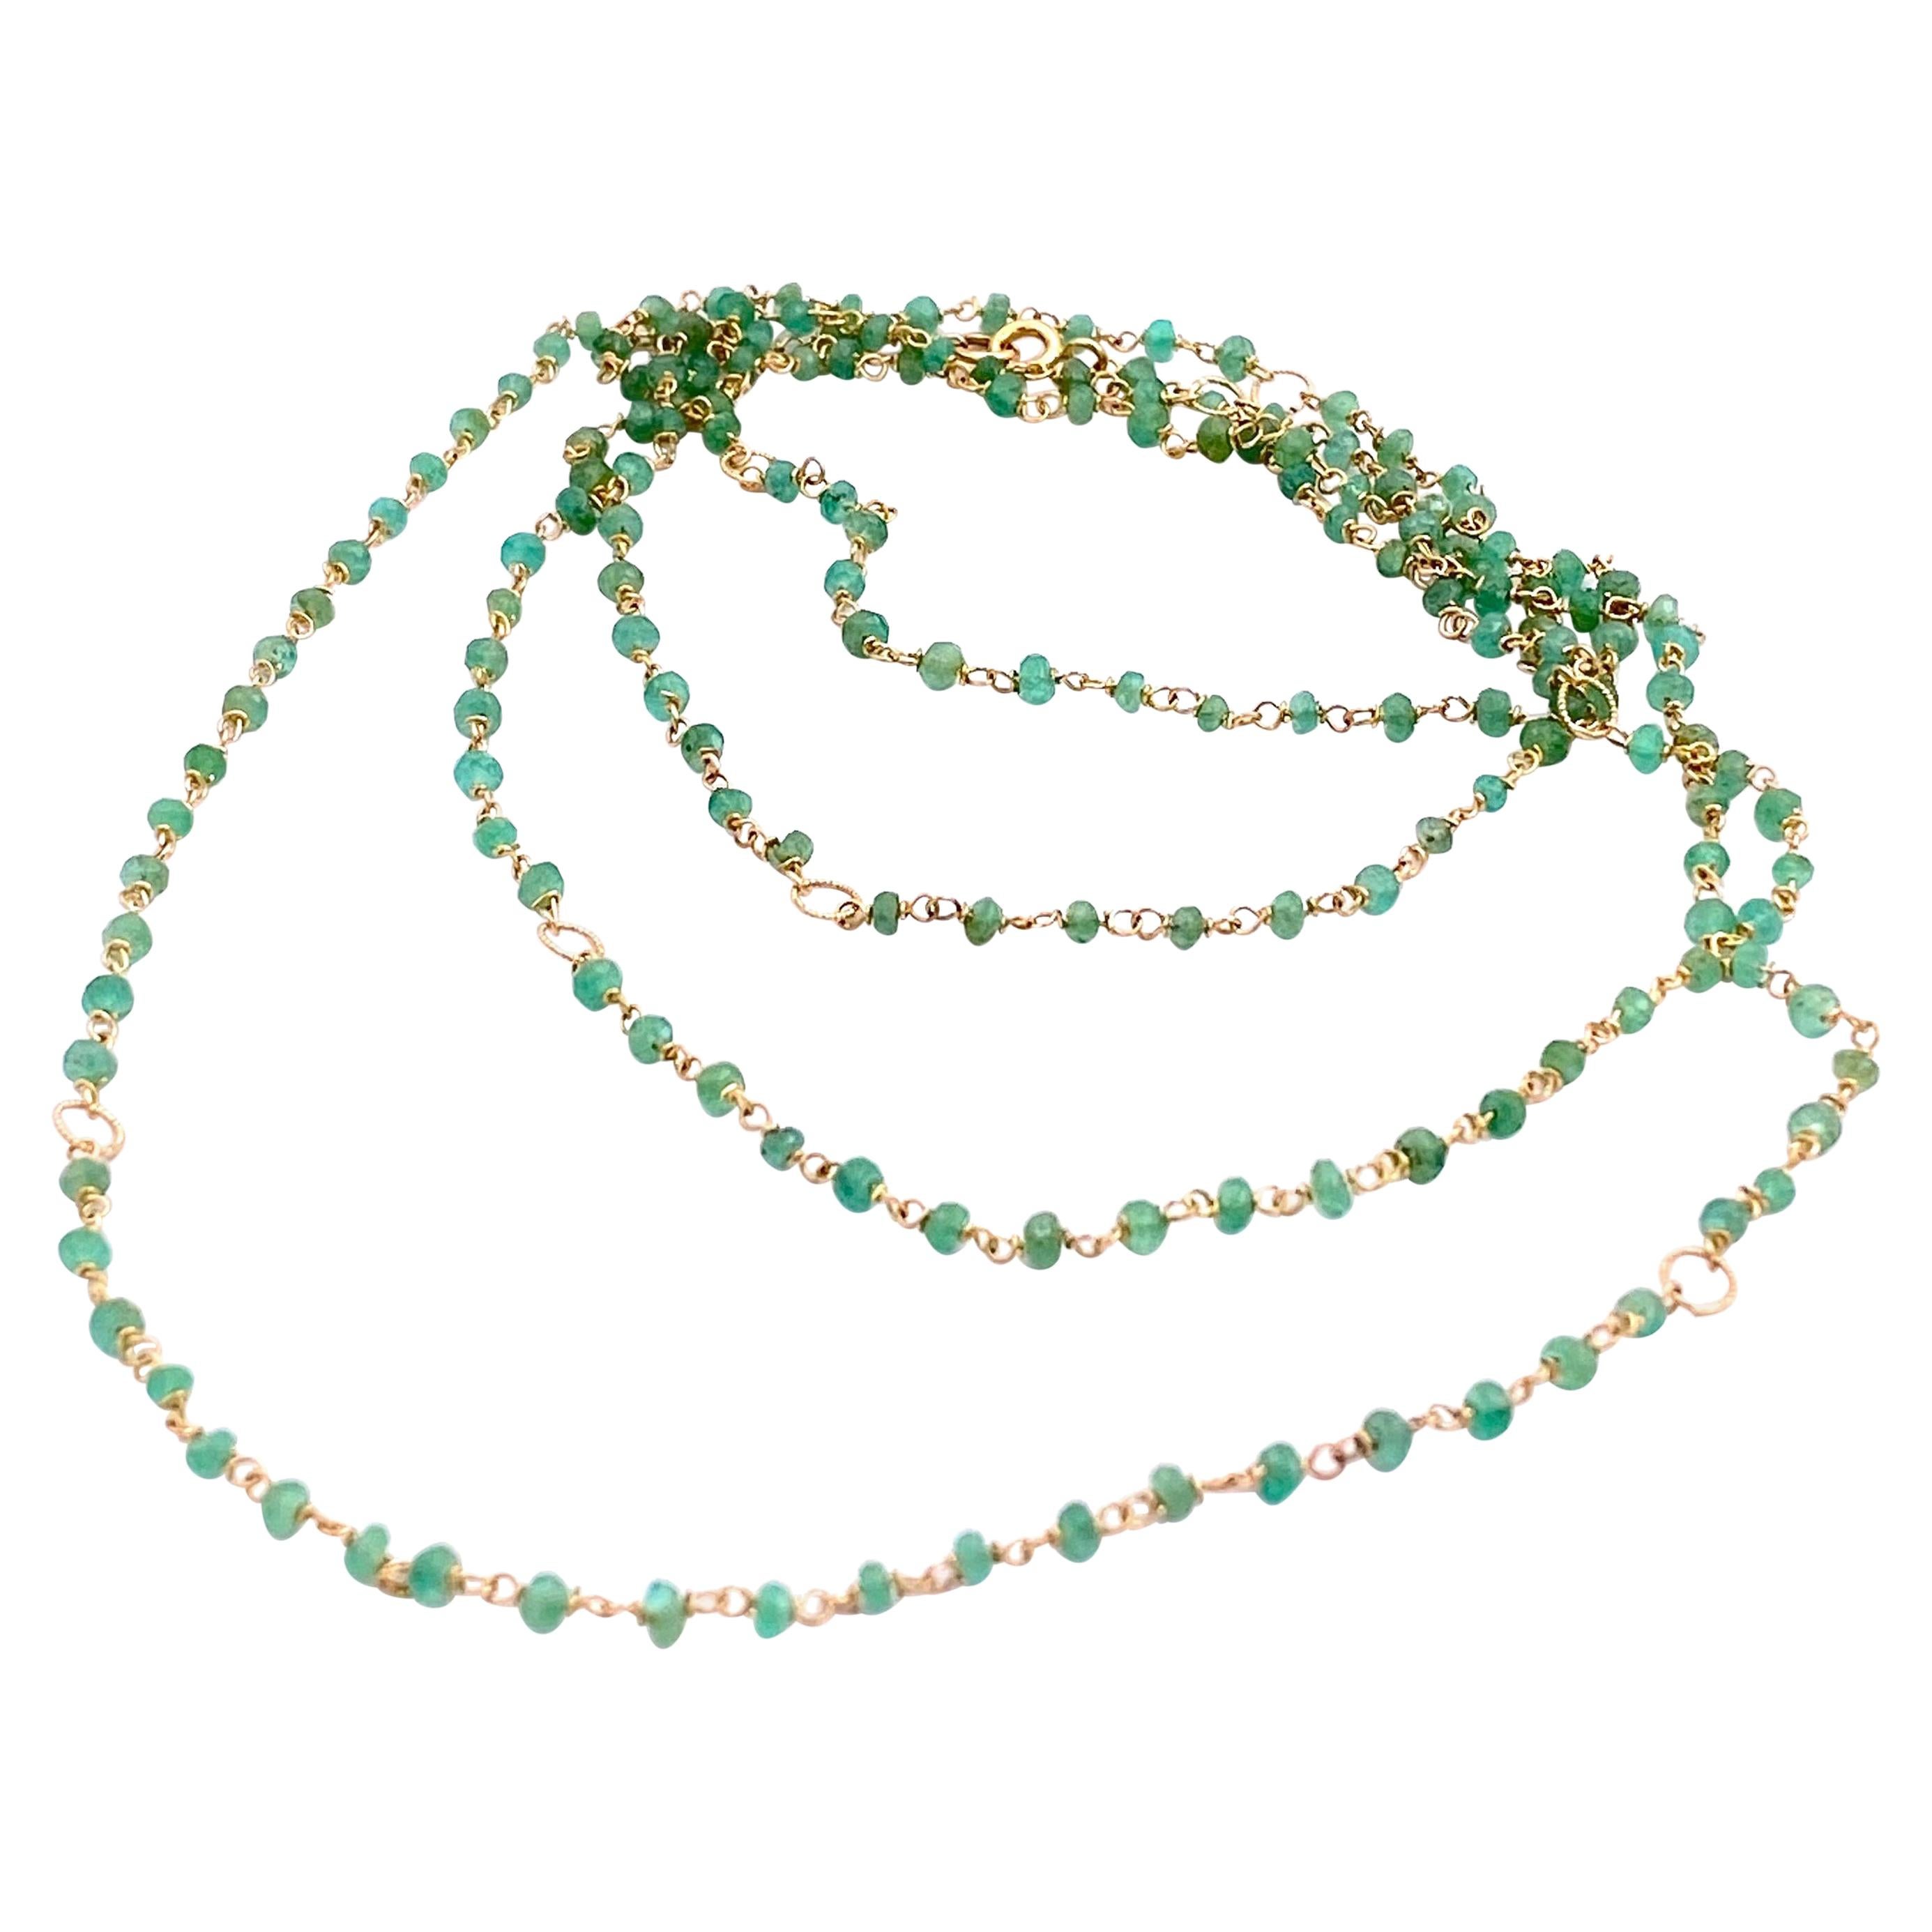 Art Deco Style 18 Karat Gold 45 Carat Emeralds Twisted Chain Beaded Necklace For Sale